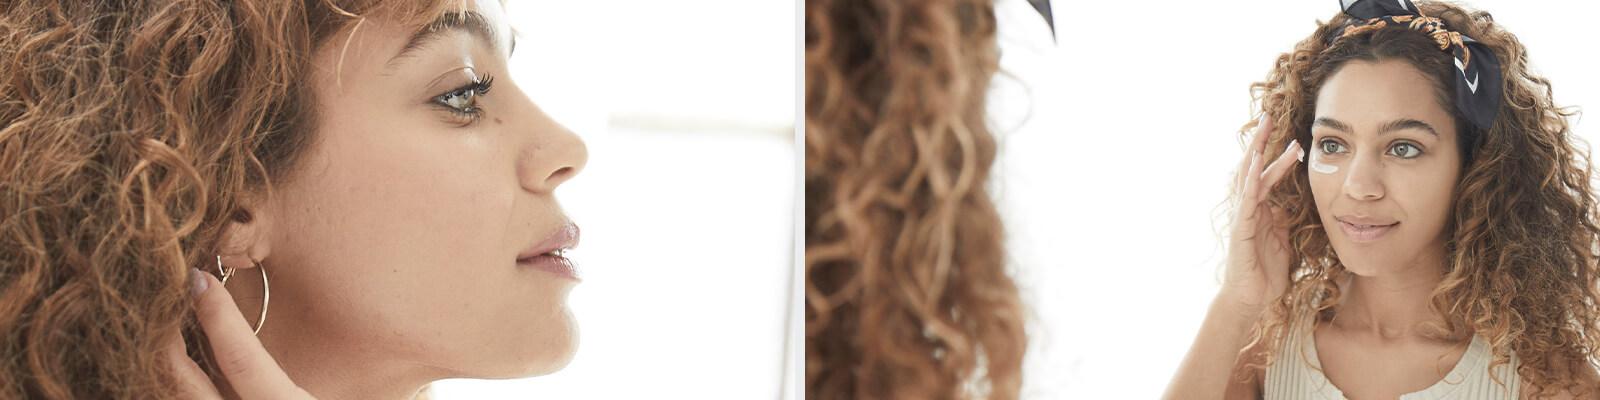 220_How_to_Take_Care_of_Your_Skin_ Header_Banner_Desktop